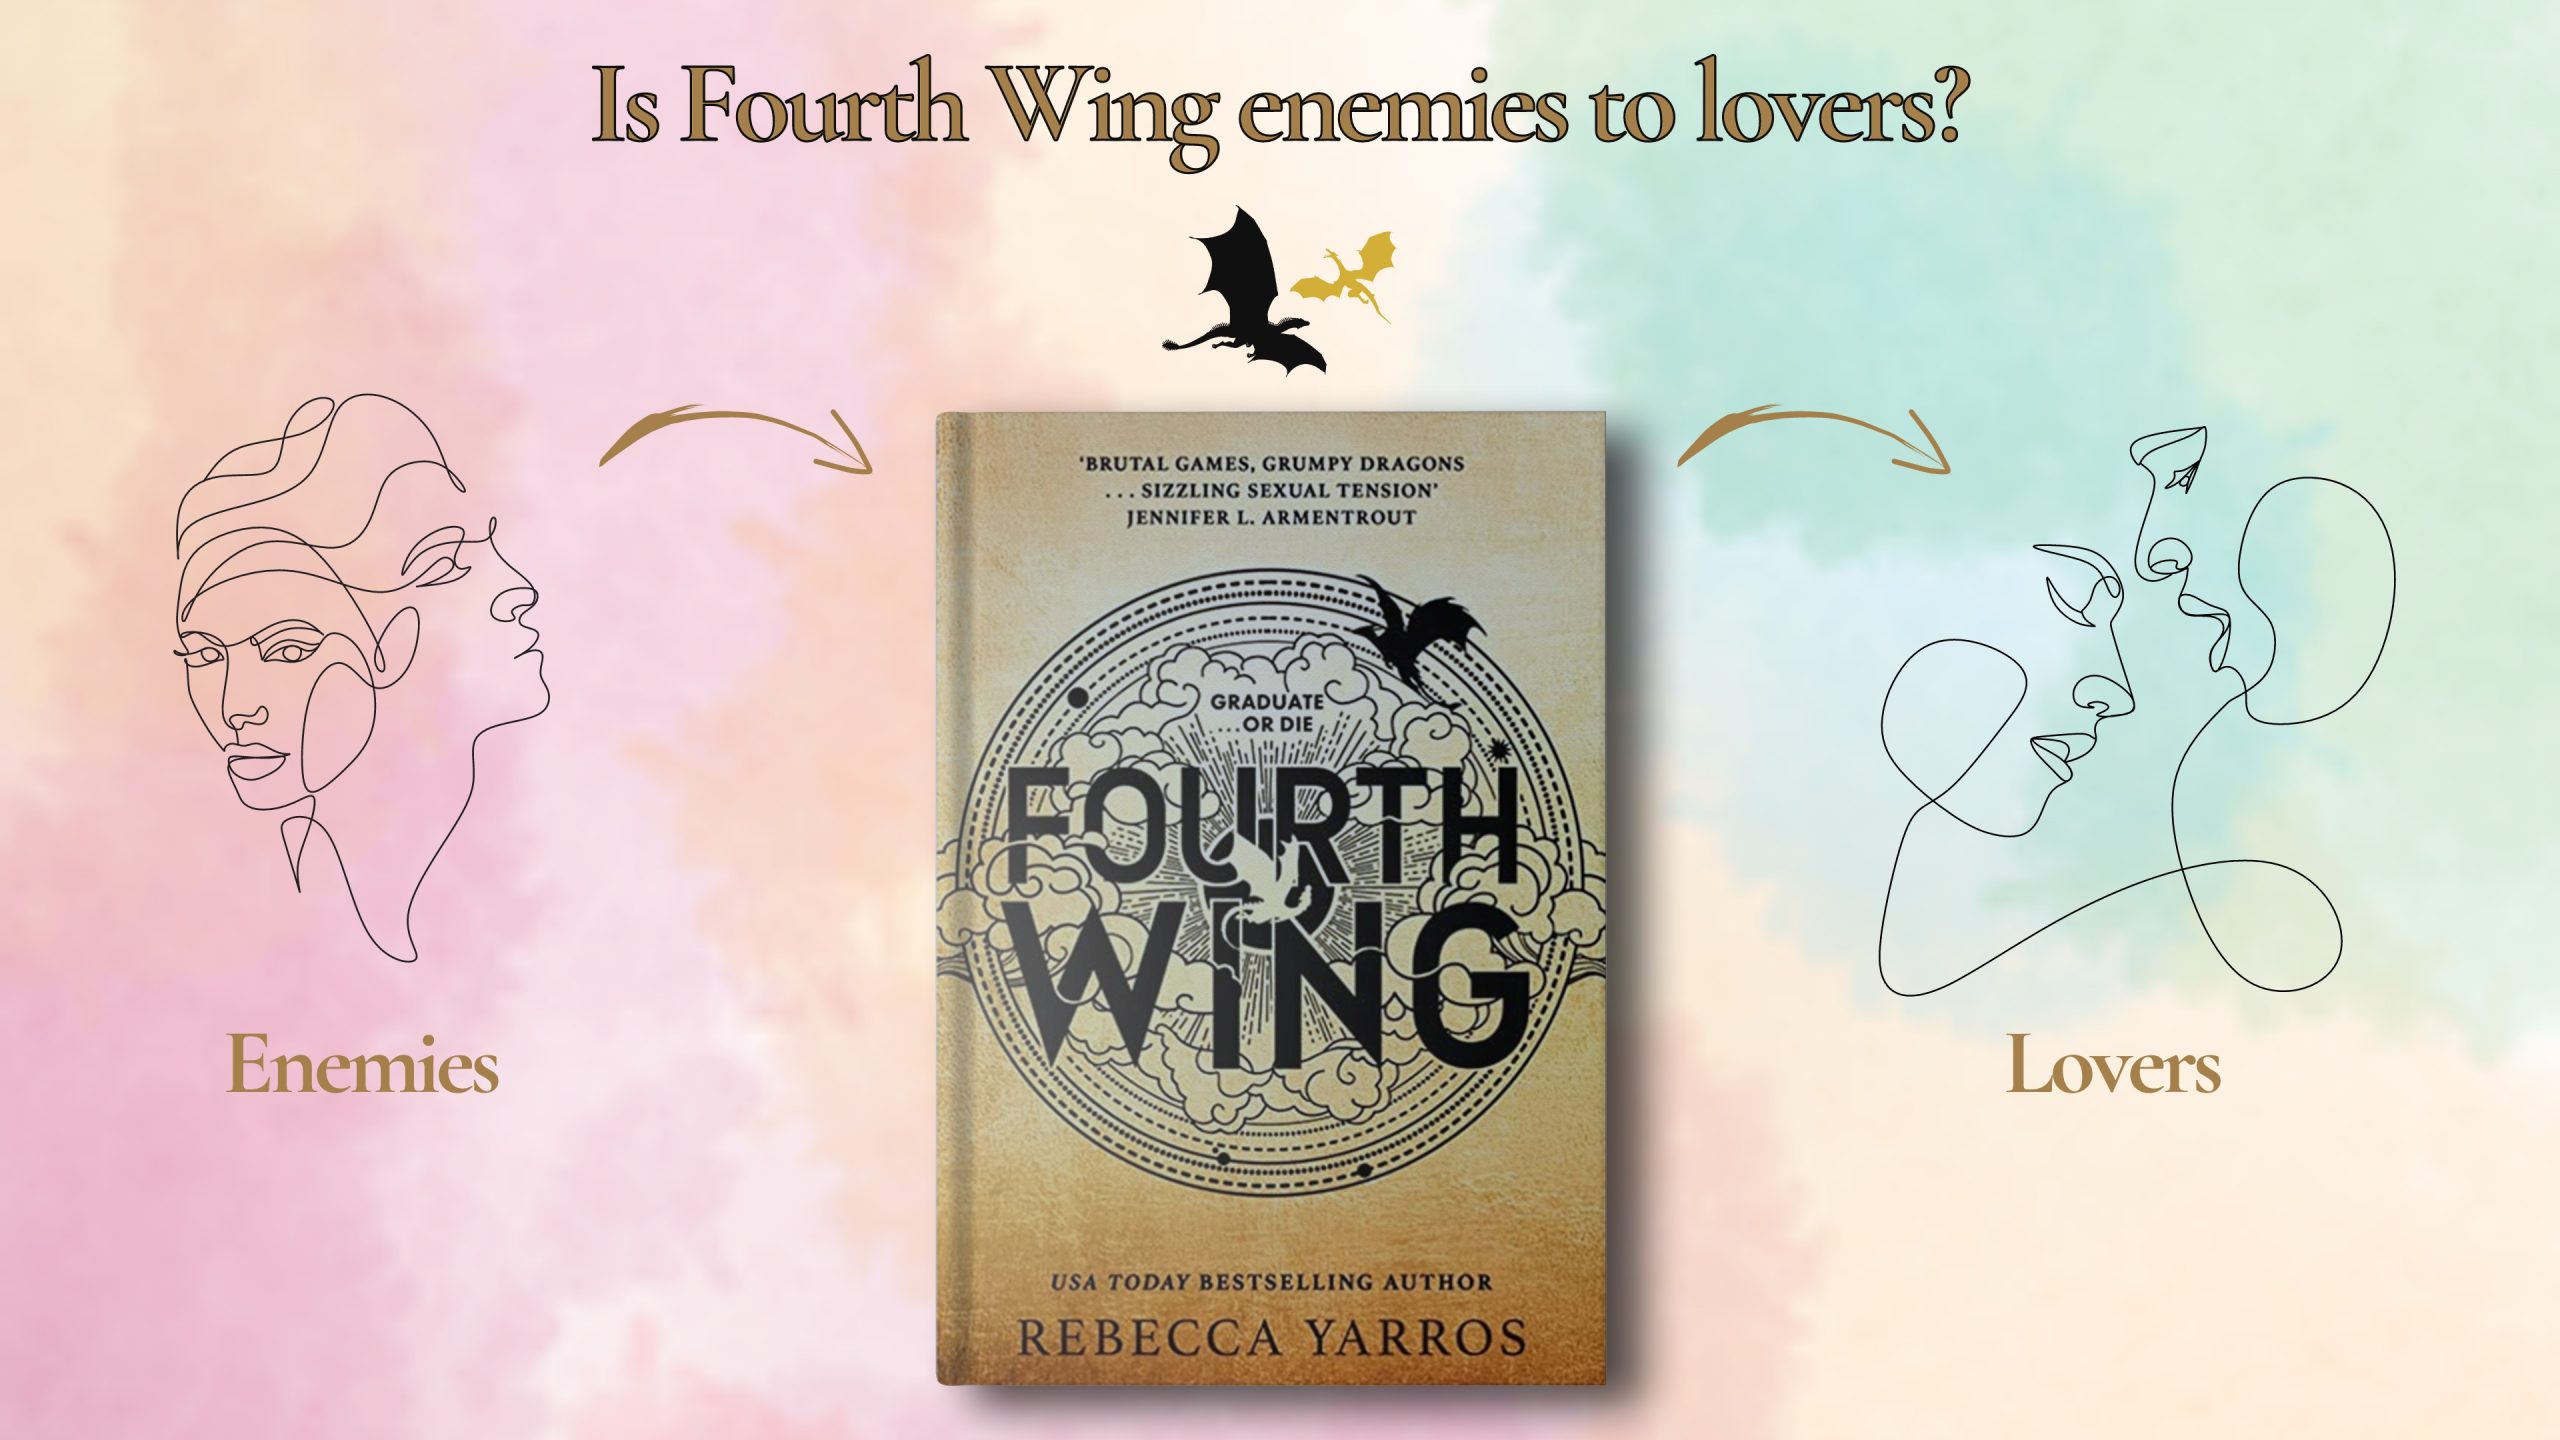 is fourth wing enemies to lovers - Rebecca Yarros